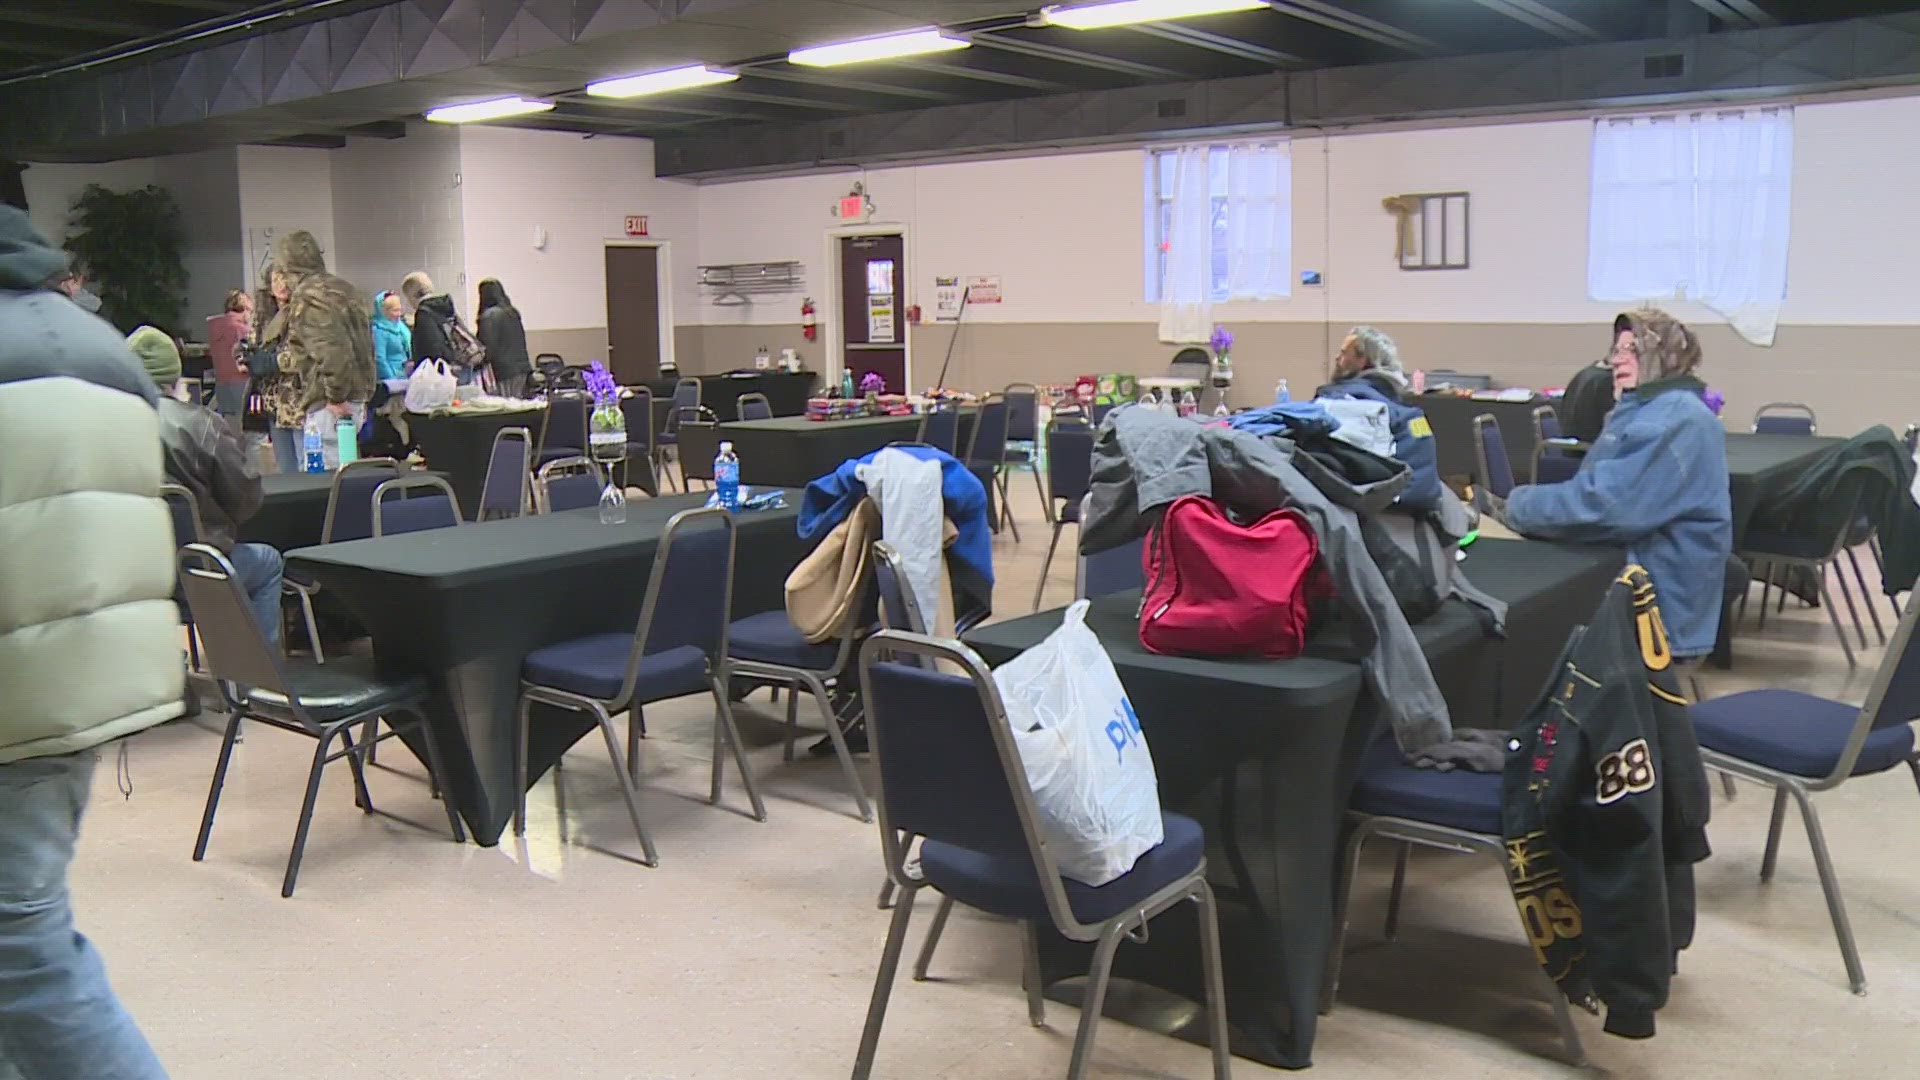 Southend Street Angels founder Amanda Mills anticipates more people will head inside the shelter as temperatures don't get above freezing until later in the week.